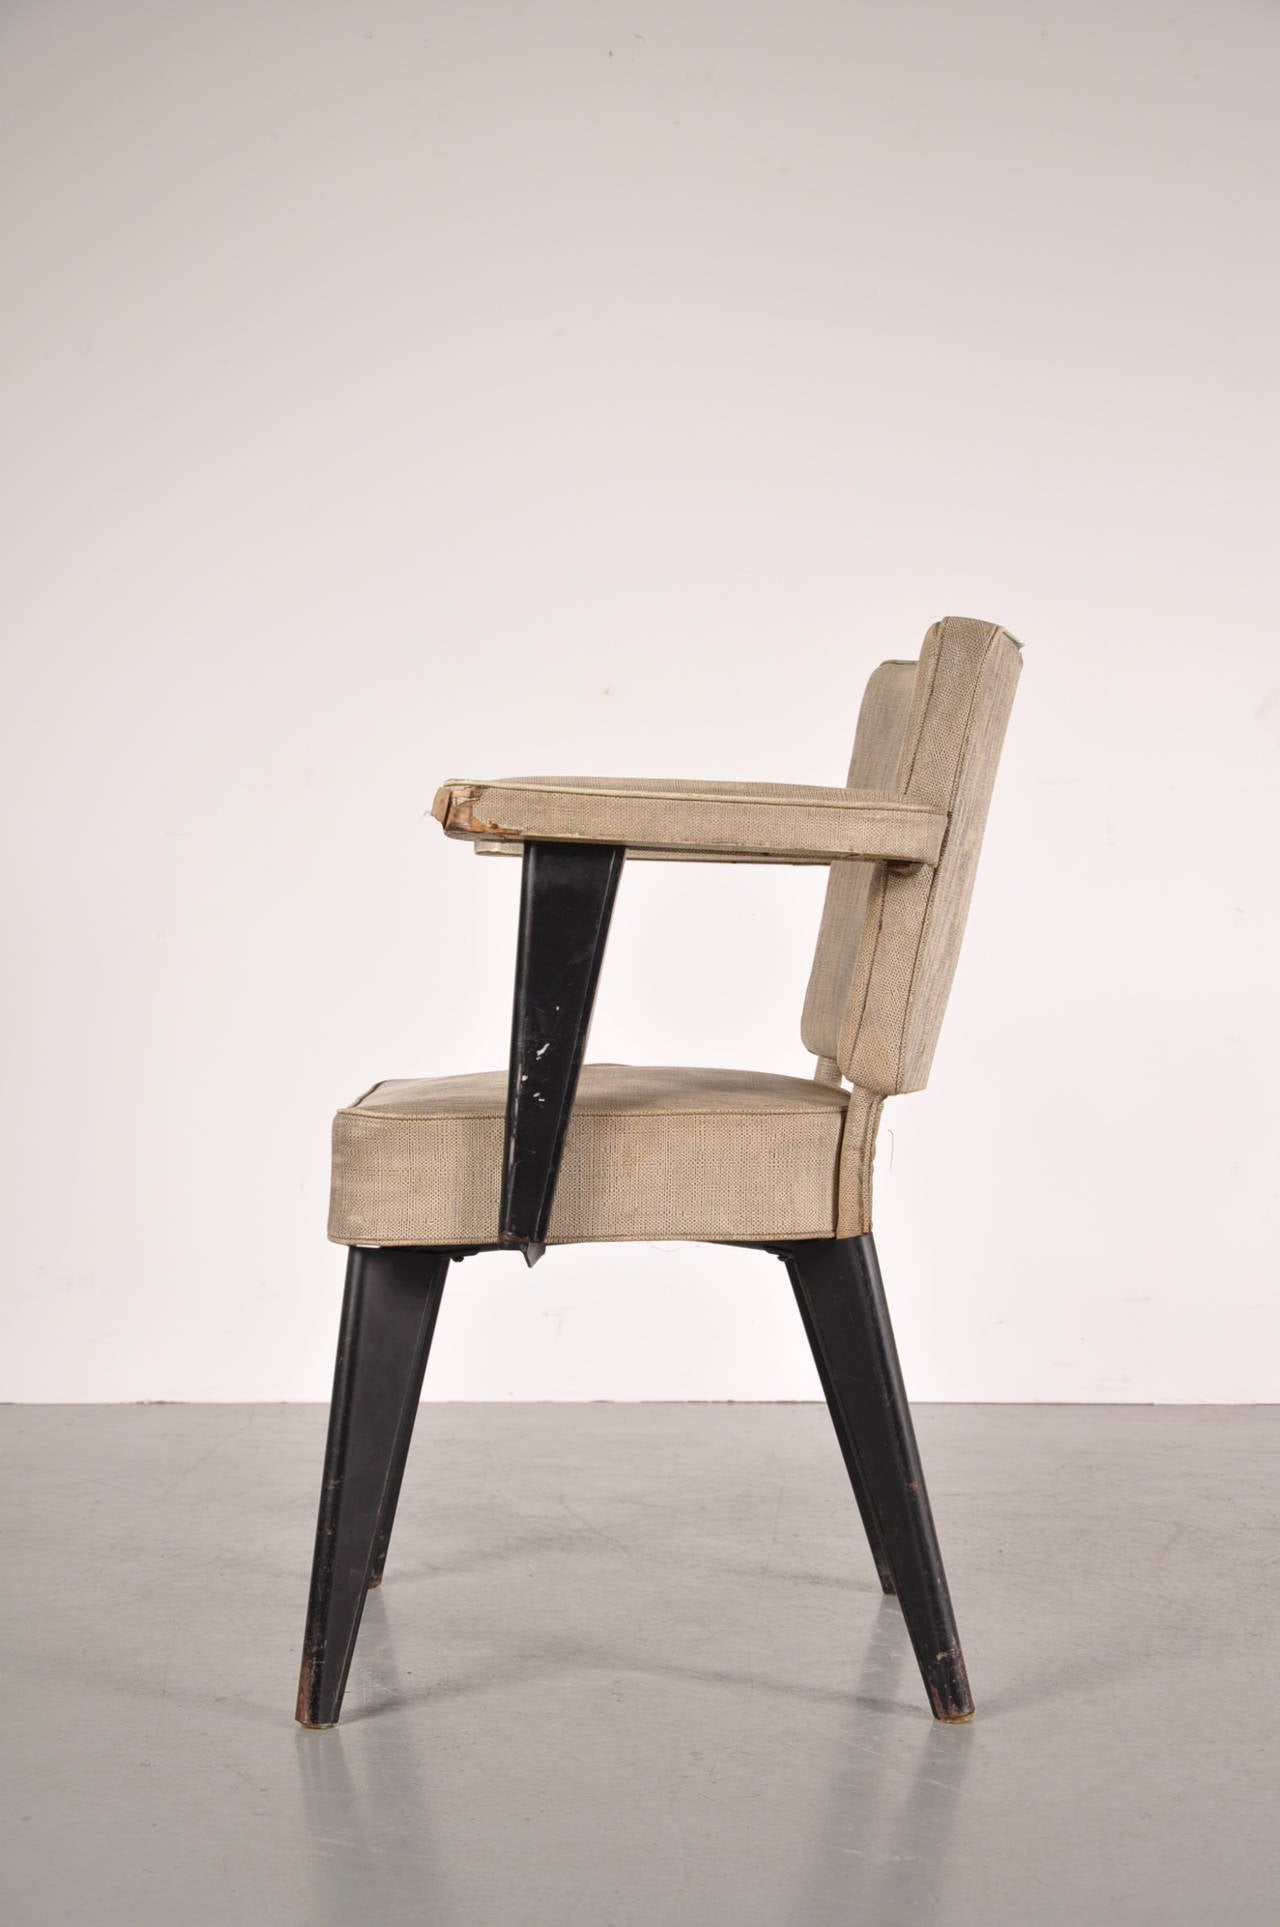 Unique completely original armchair by Dominique, manufactured around 1960.

This unique chair was designed as a dinner chair for the officers of the flagship French aircraft carrier 